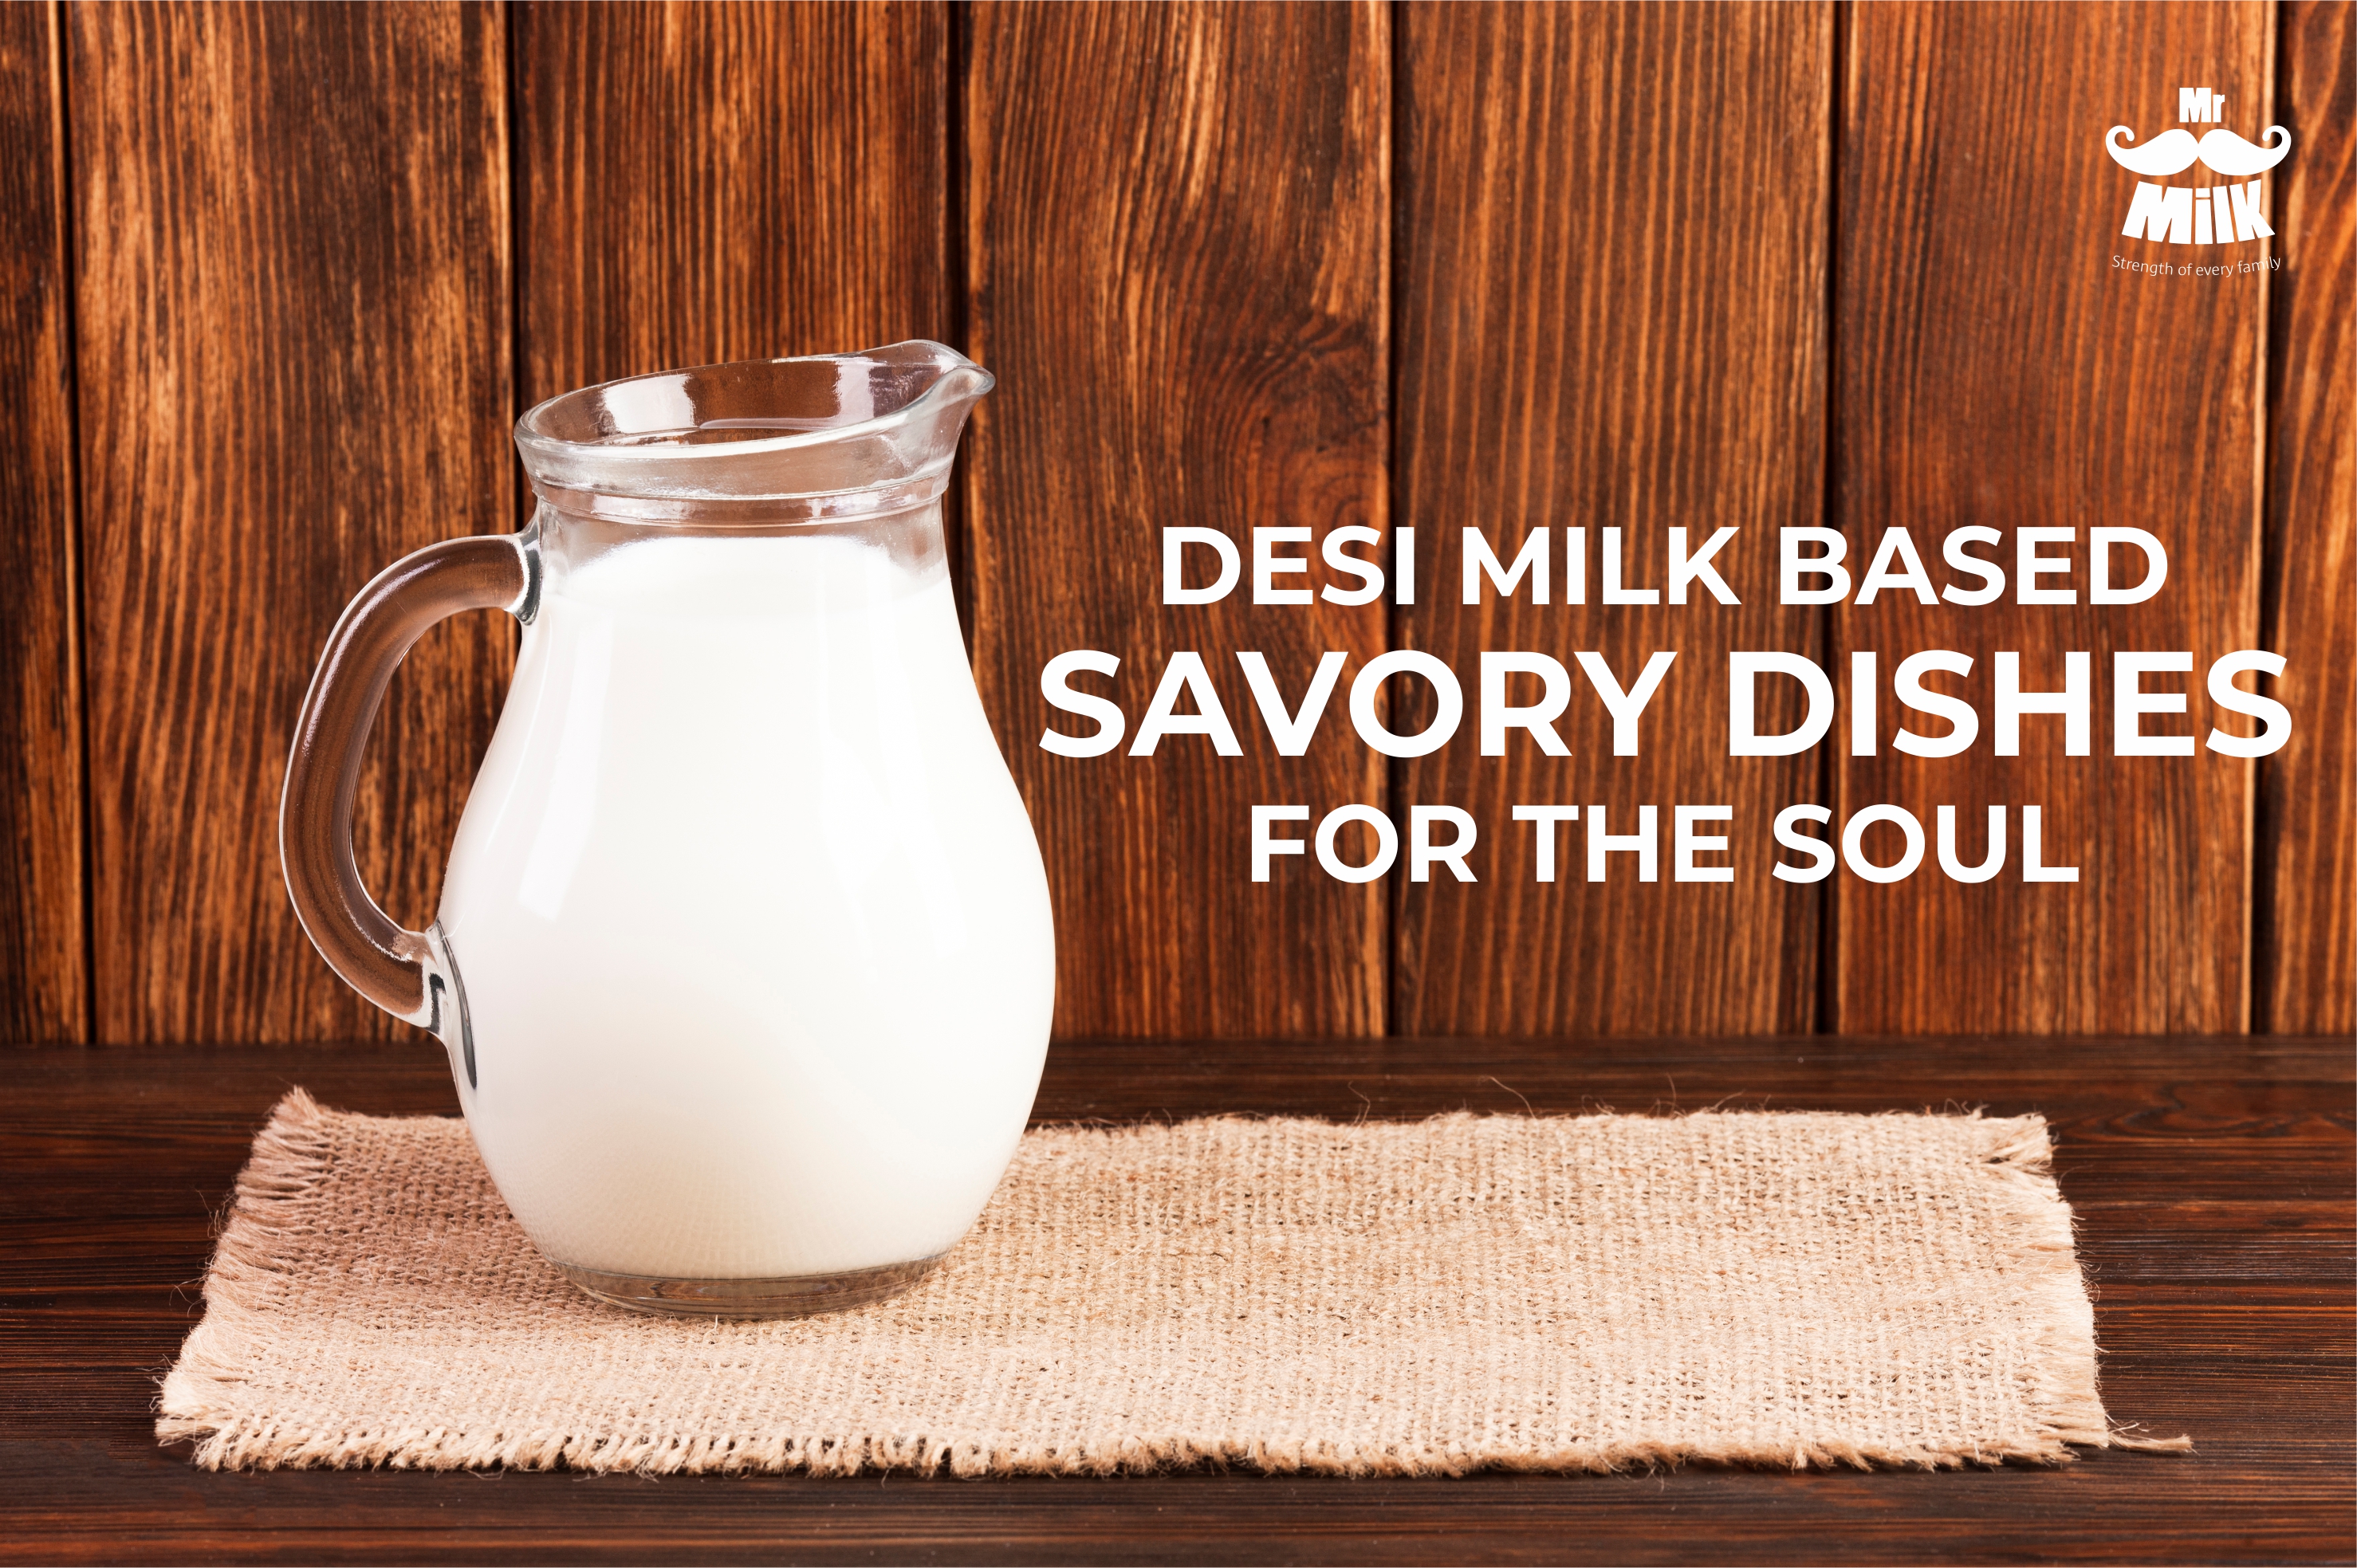 Desi milk-based Savory Dishes for the soul